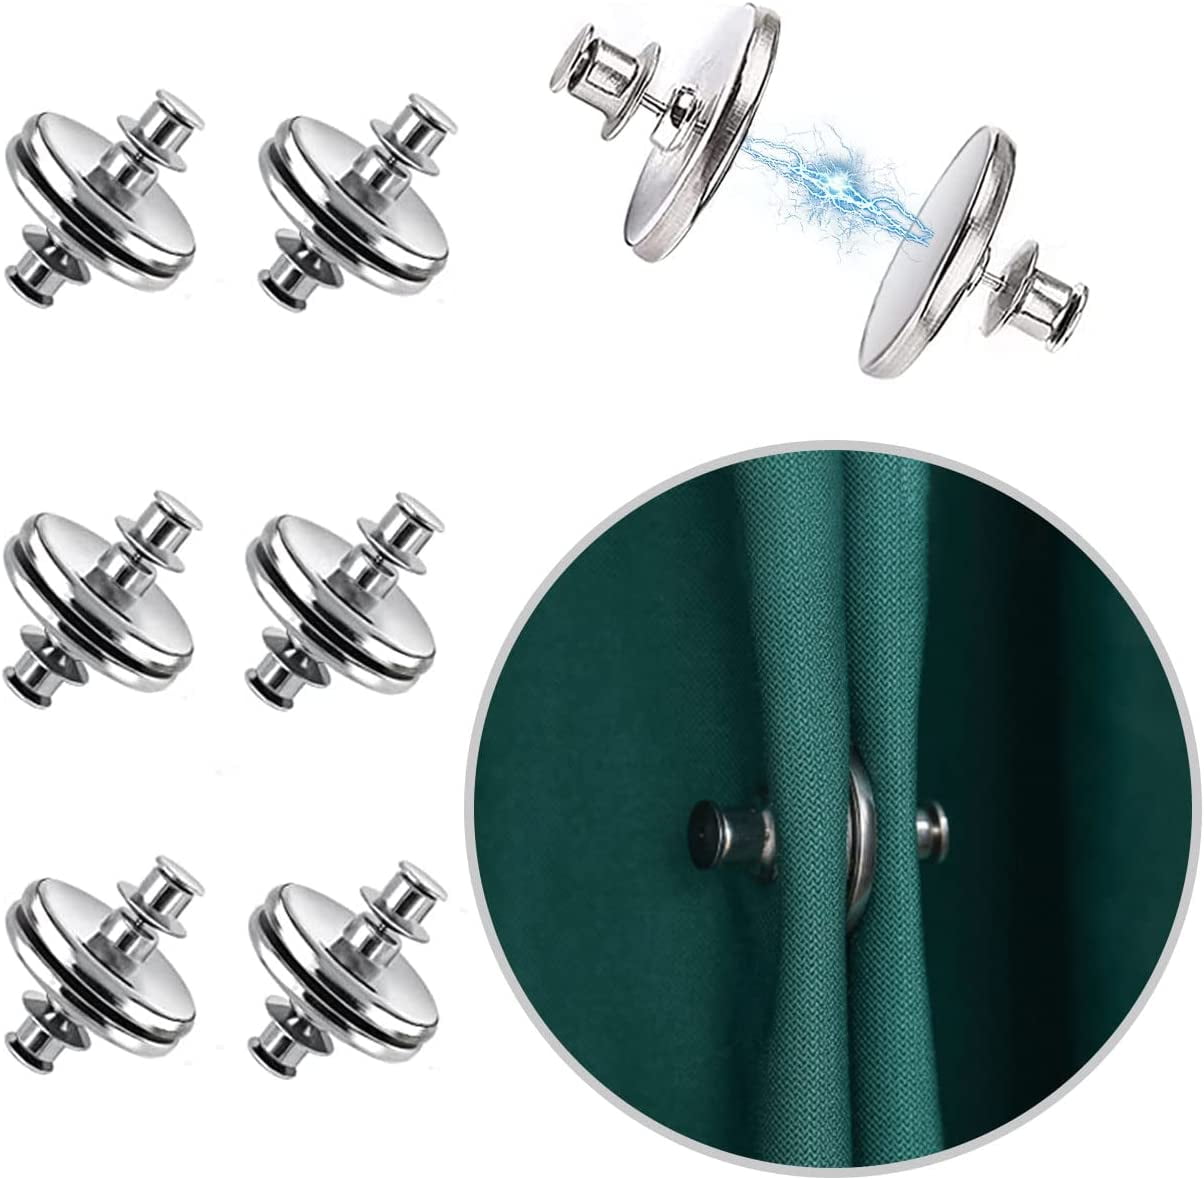 8 Pairs Curtain Magnets Closure, Magnetic Curtain Clips for Indoor Outdoor  Curtains Prevent Light Leaking, Strong Curtain Weights Magnets for Pergola